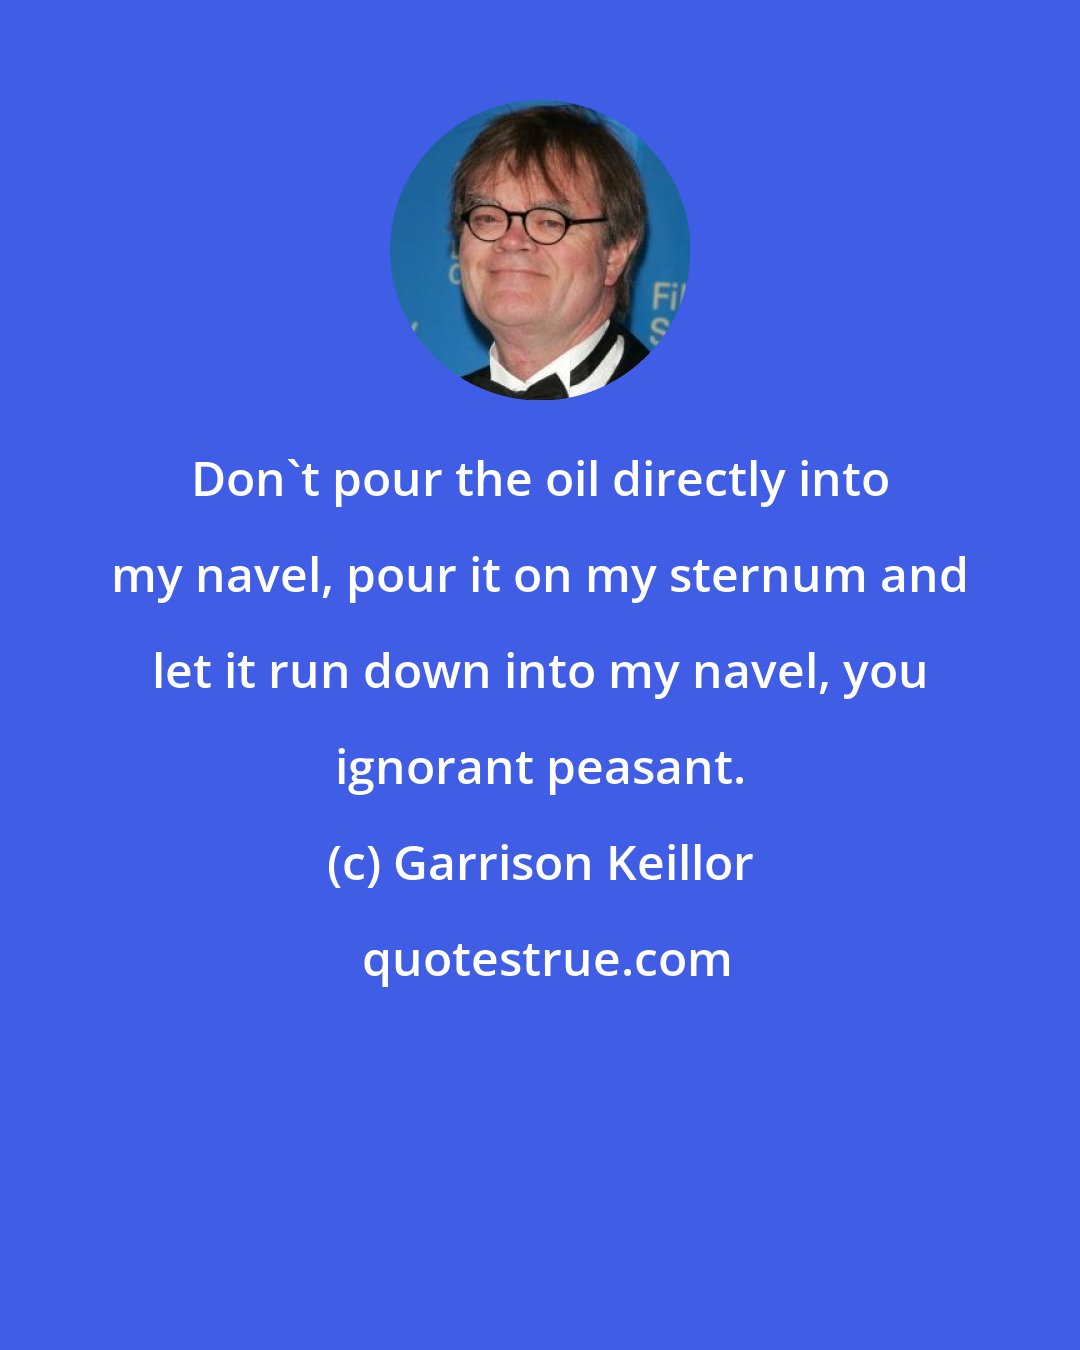 Garrison Keillor: Don't pour the oil directly into my navel, pour it on my sternum and let it run down into my navel, you ignorant peasant.